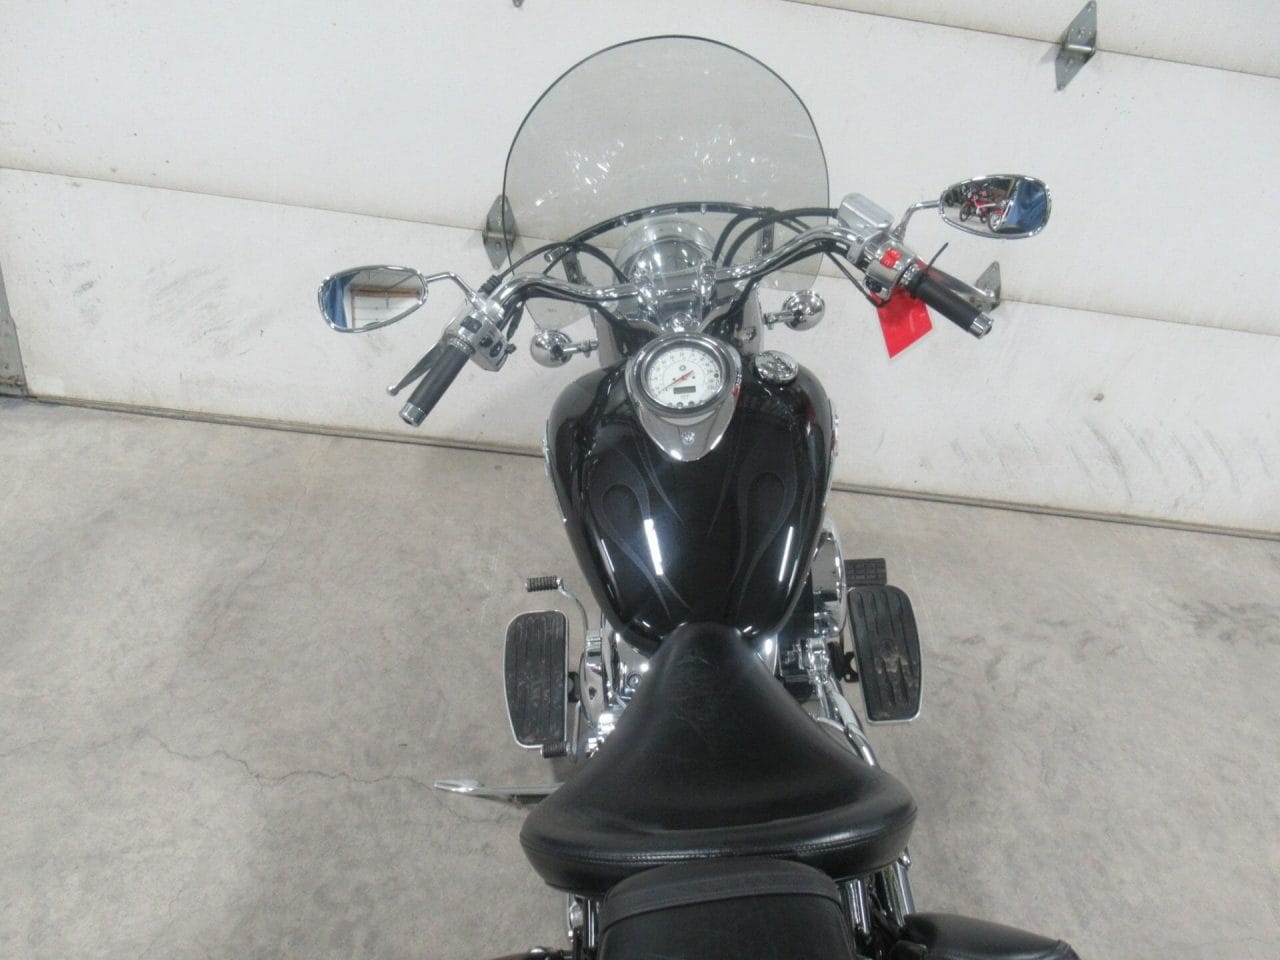 2006 Yamaha V-Star 1100 Classic * Low Miles * Great Condition *